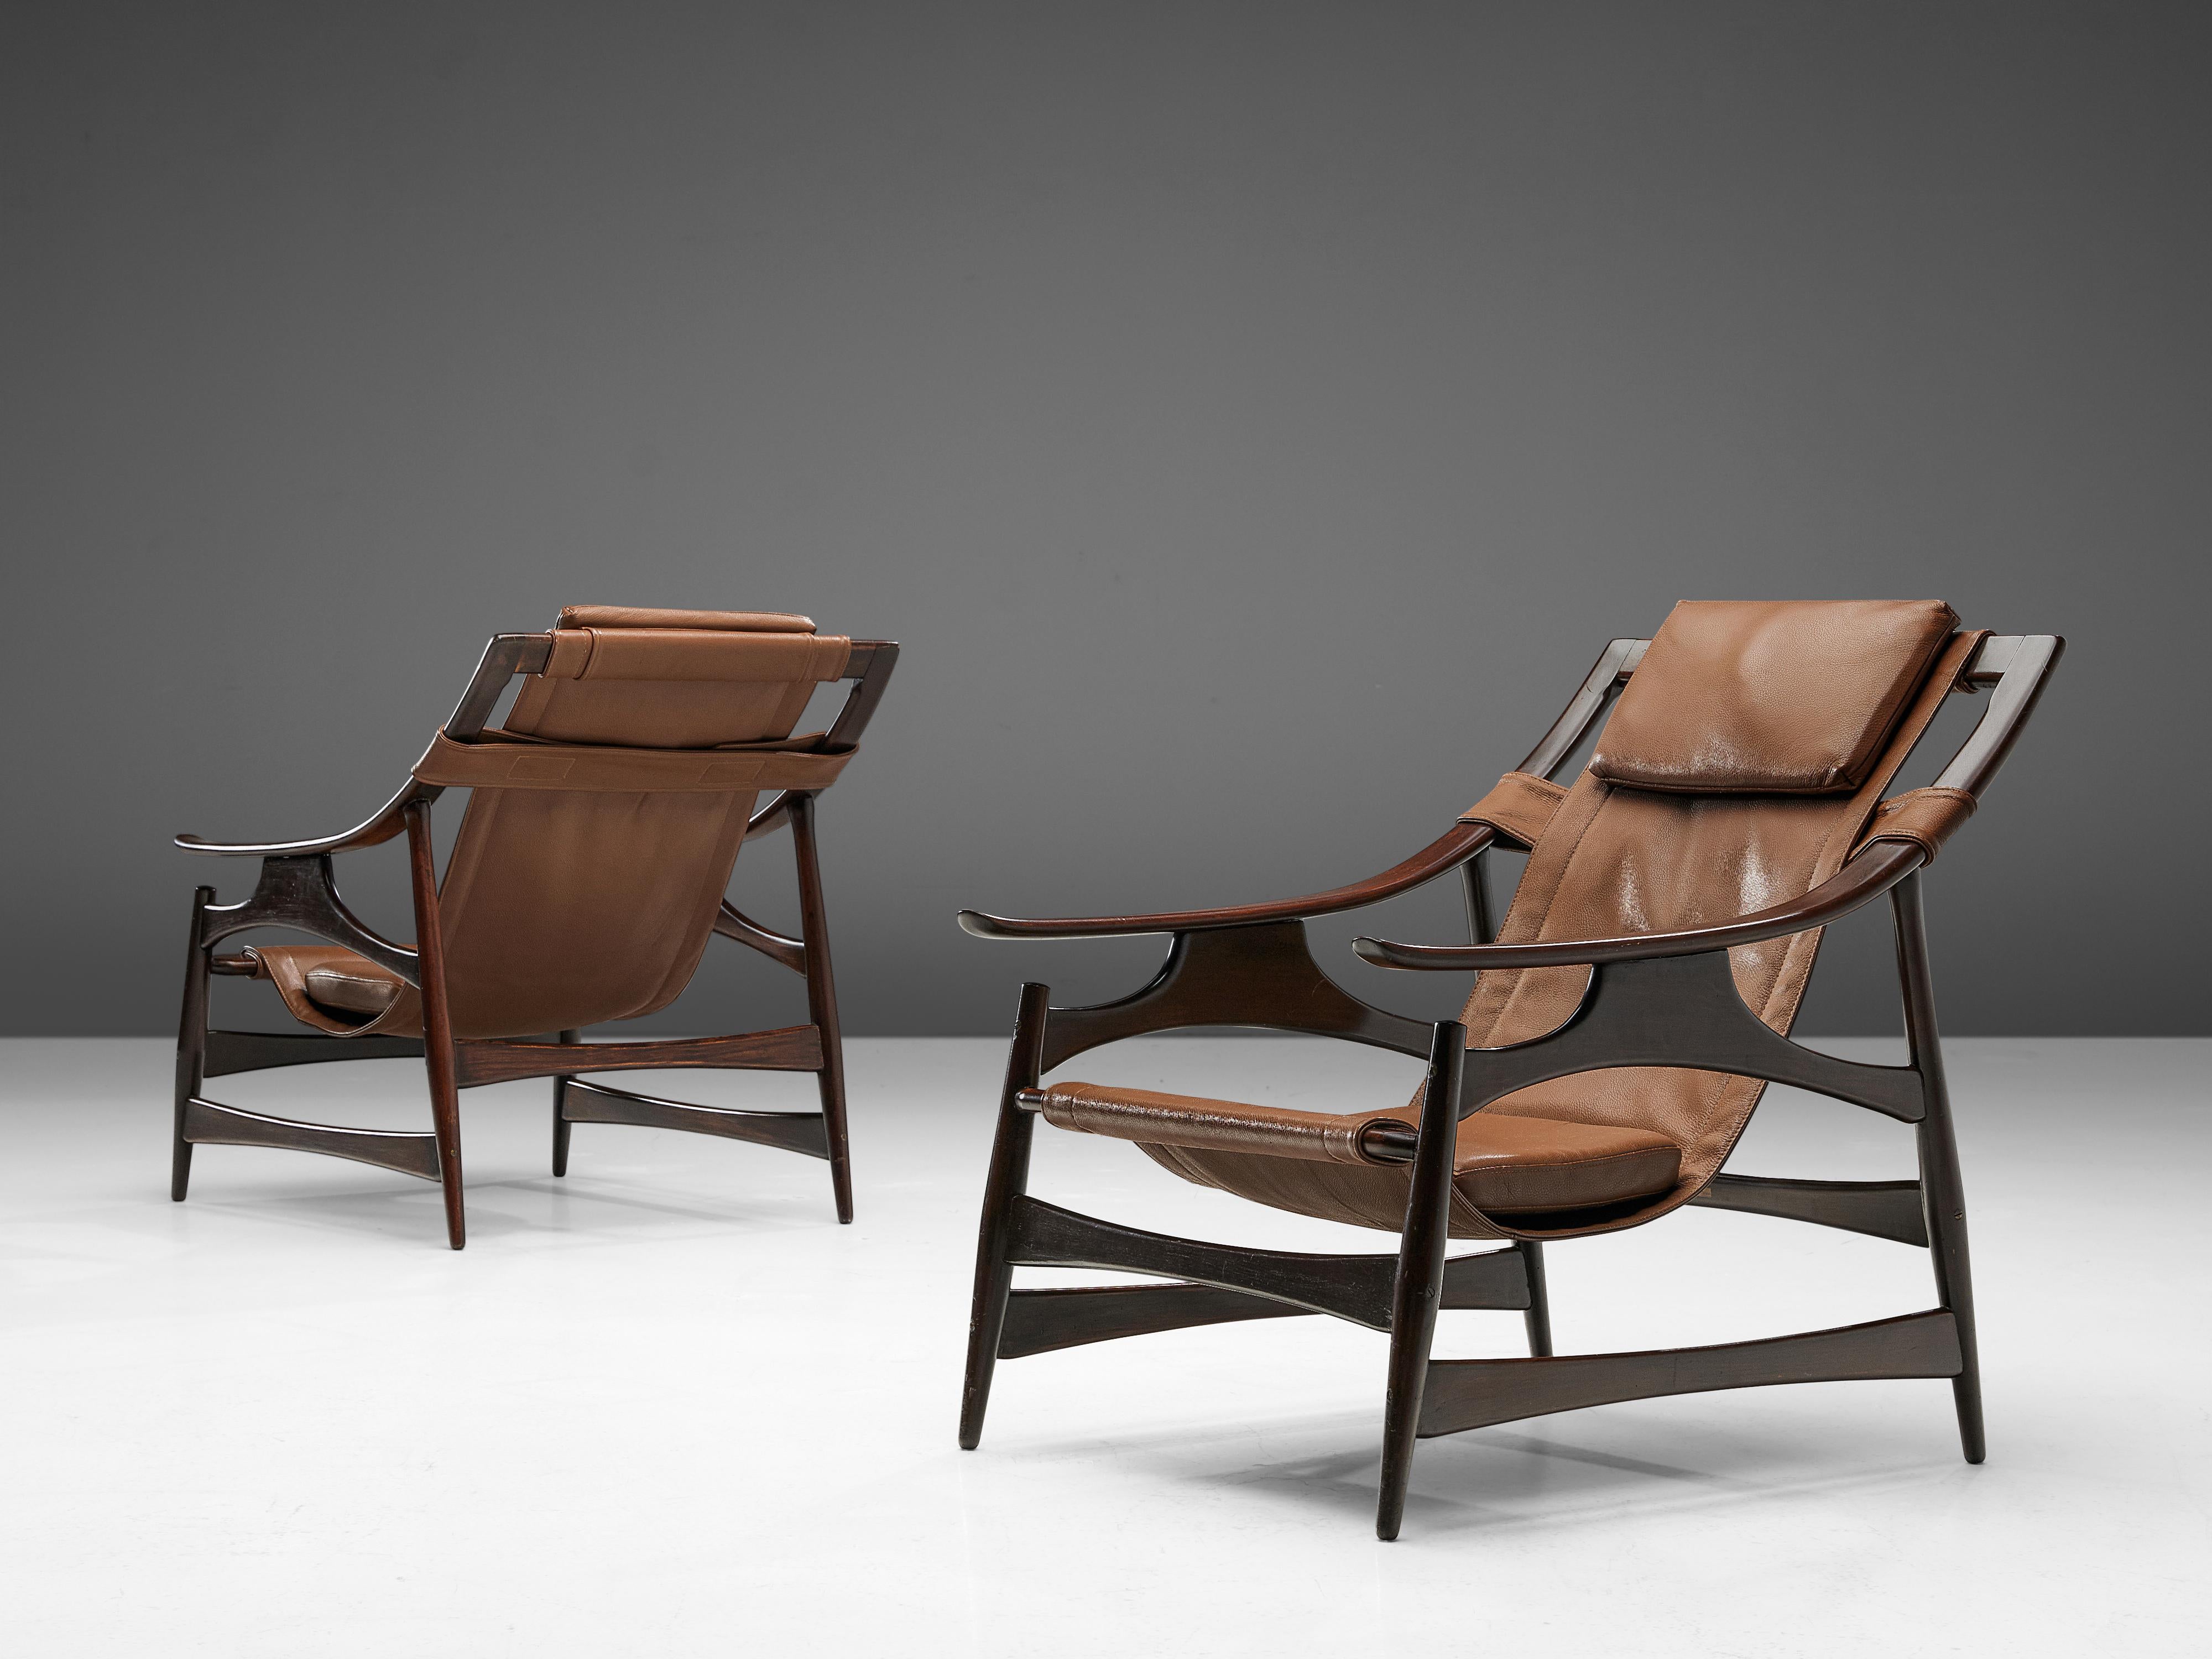 Liceu de Artes e Oficios, lounge chair, darkened embuia wood, leather, Brazil, 1960s. 

Beautiful lounge chair in dark Brazilian walnut with a brown leather upholstery. The frame is a sort of wooden skeleton. It has an open character with